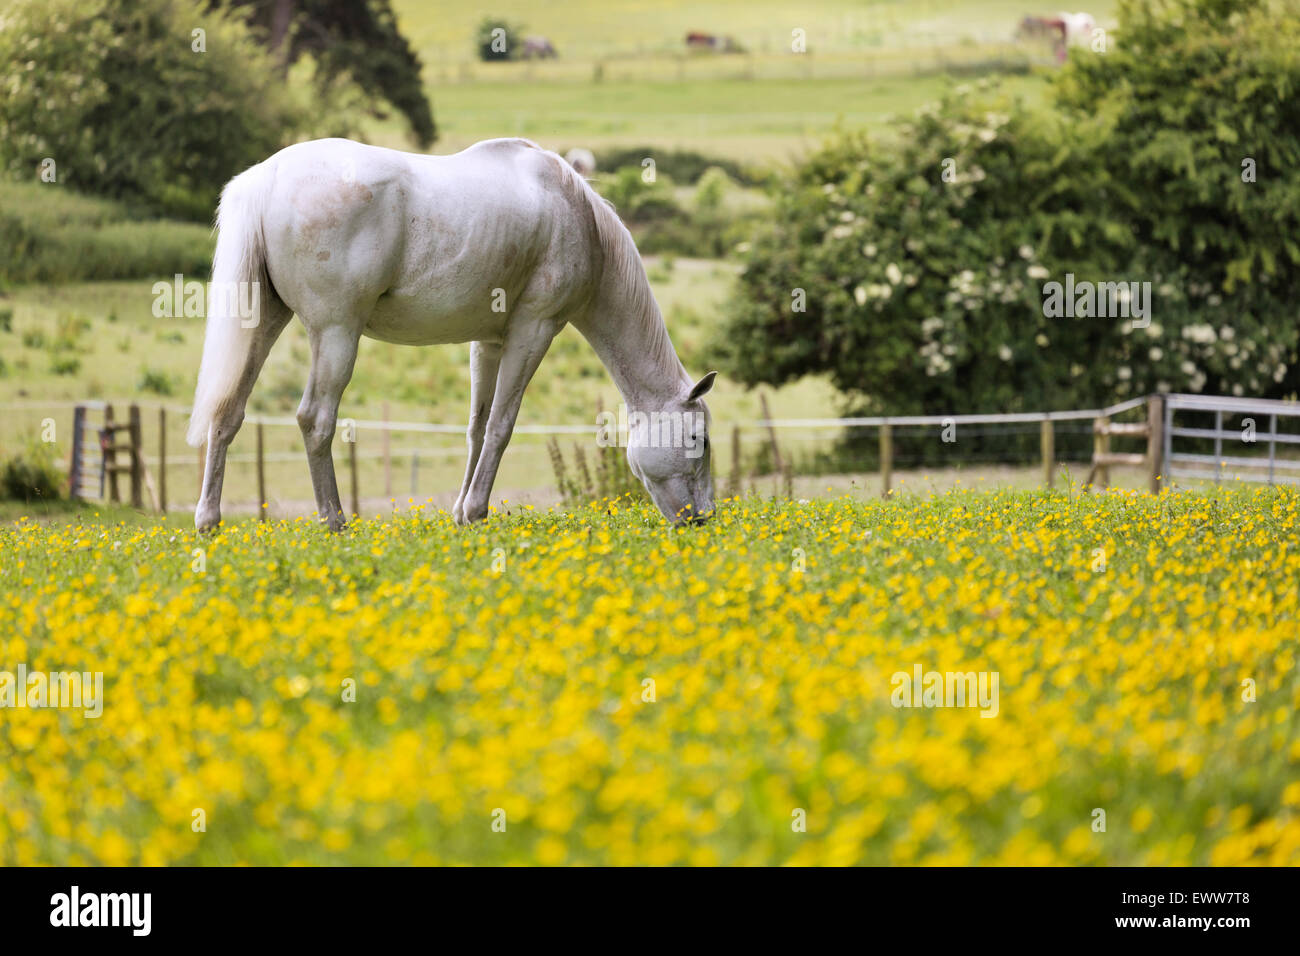 White horse grazing in a field of buttercups Stock Photo